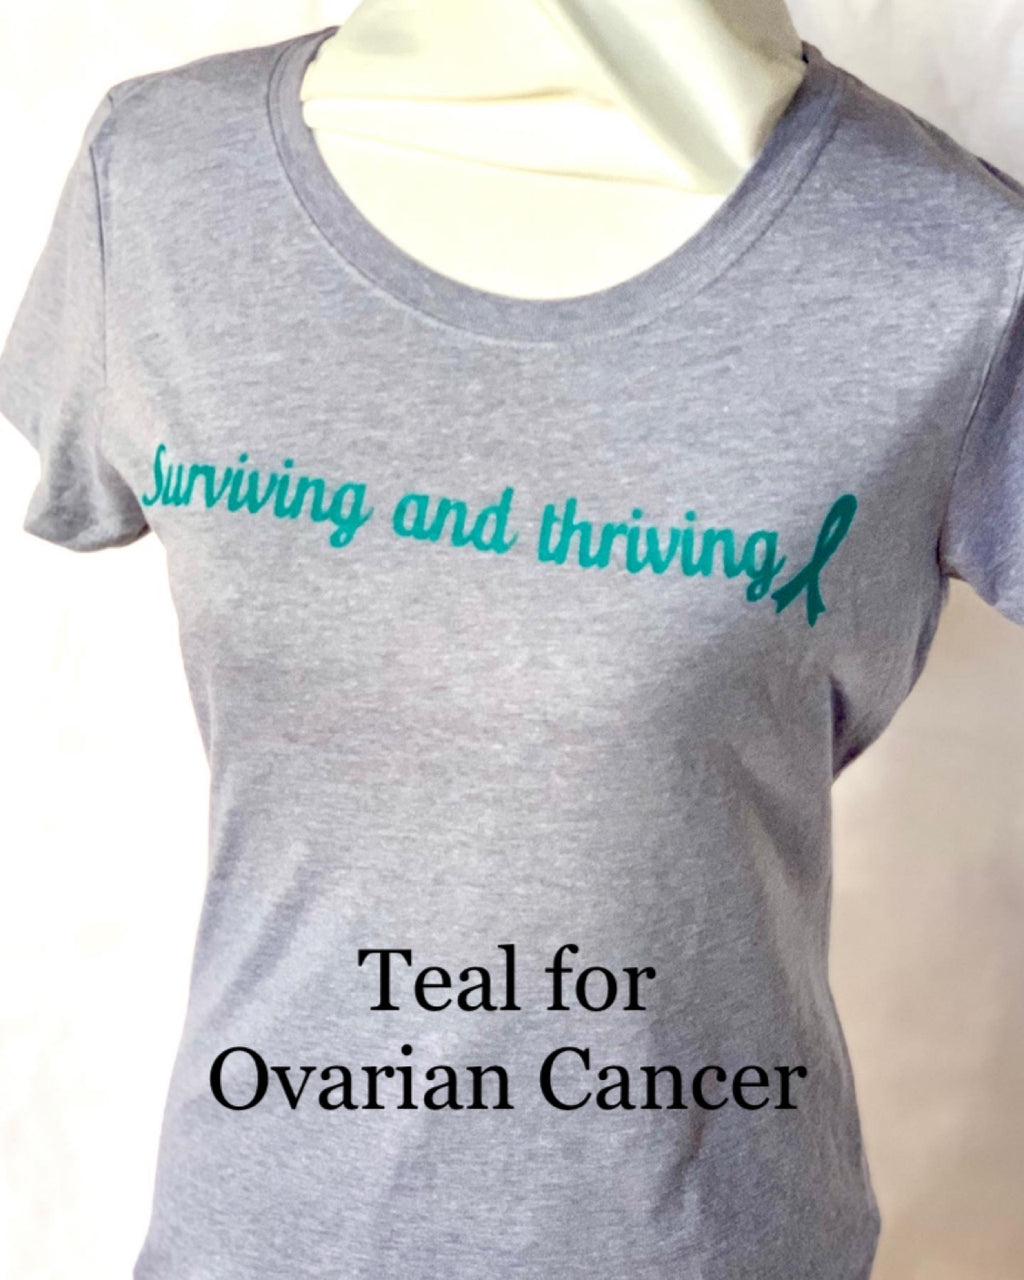 #5001 - Surviving and Thriving T-Shirt - Ovarian Cancer